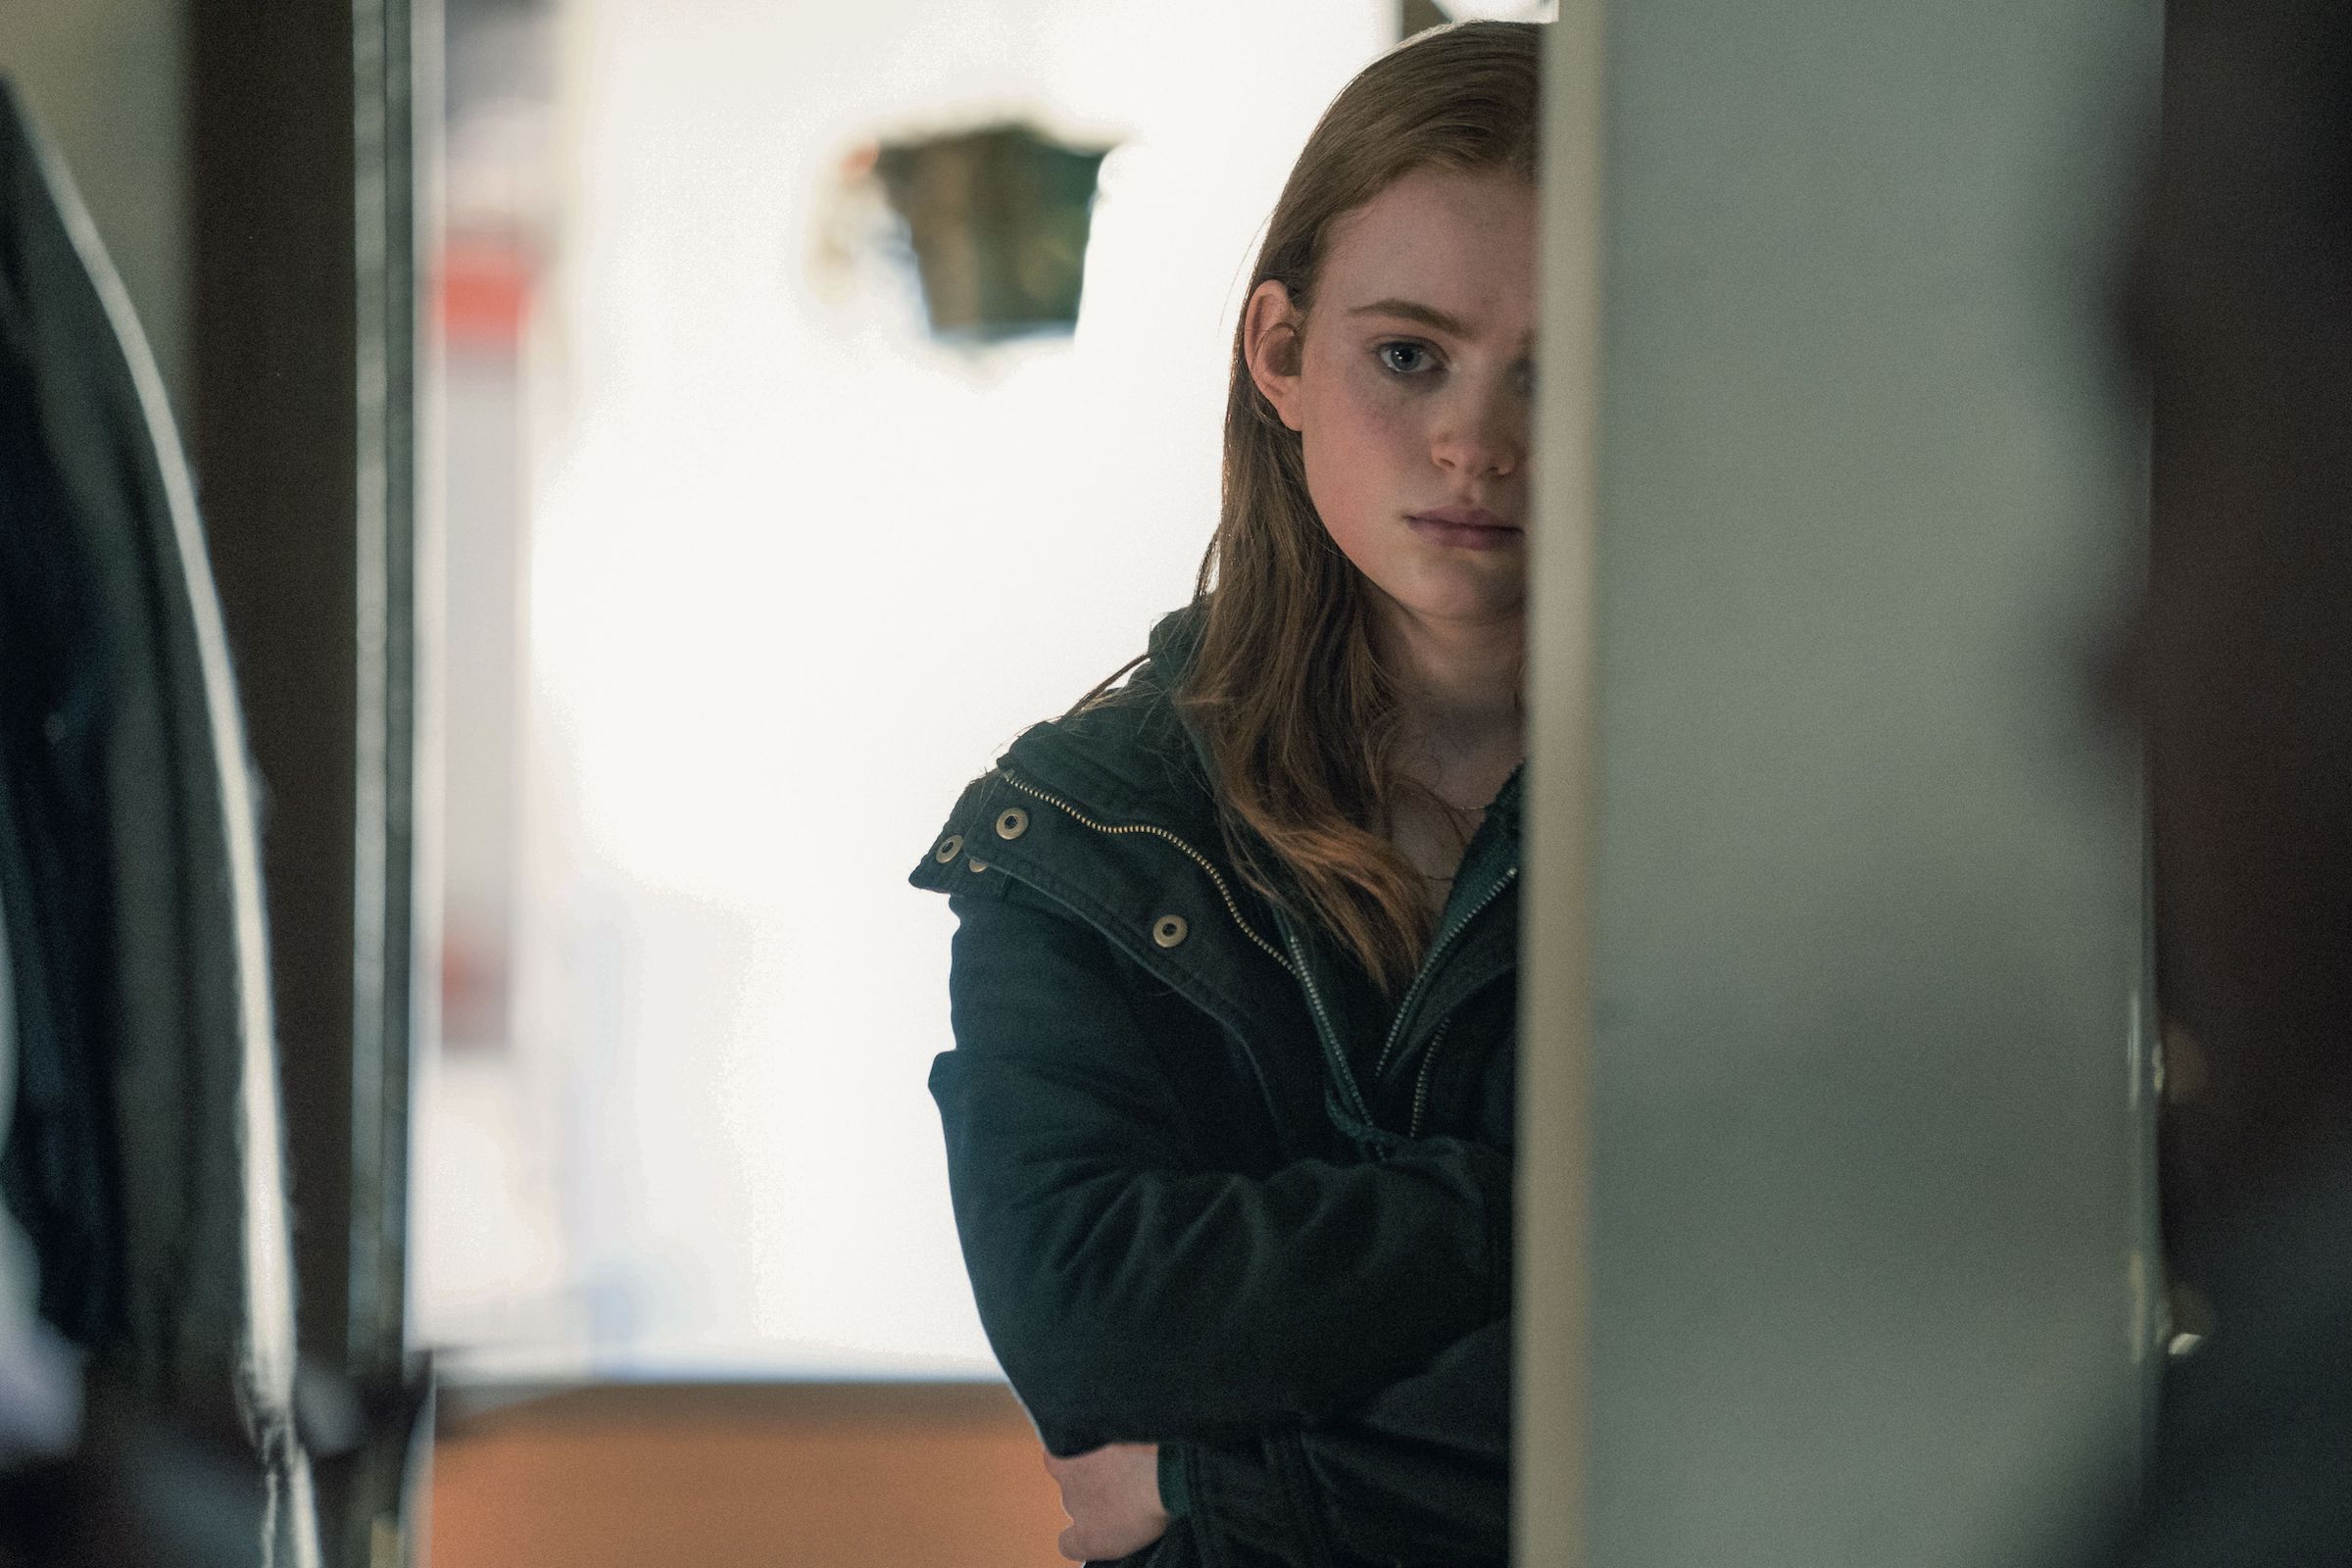 Sadie Sink and Hong Chau on working with Brendan Fraser on
The Whale